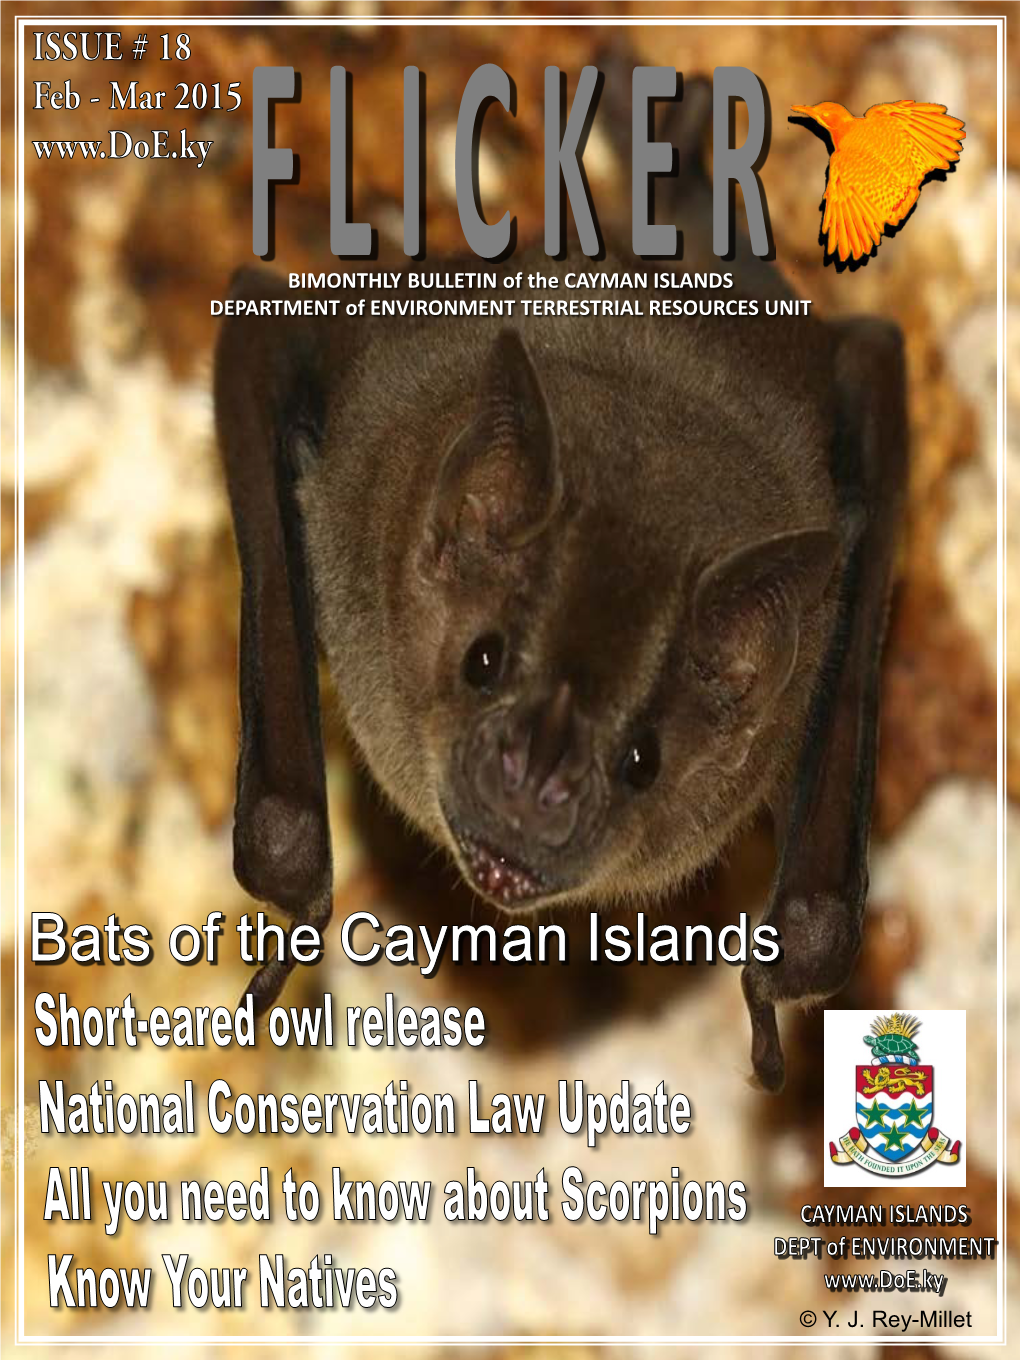 BIMONTHLY BULLETIN of the CAYMAN ISLANDS DEPARTMENT of ENVIRONMENT TERRESTRIAL RESOURCES UNIT